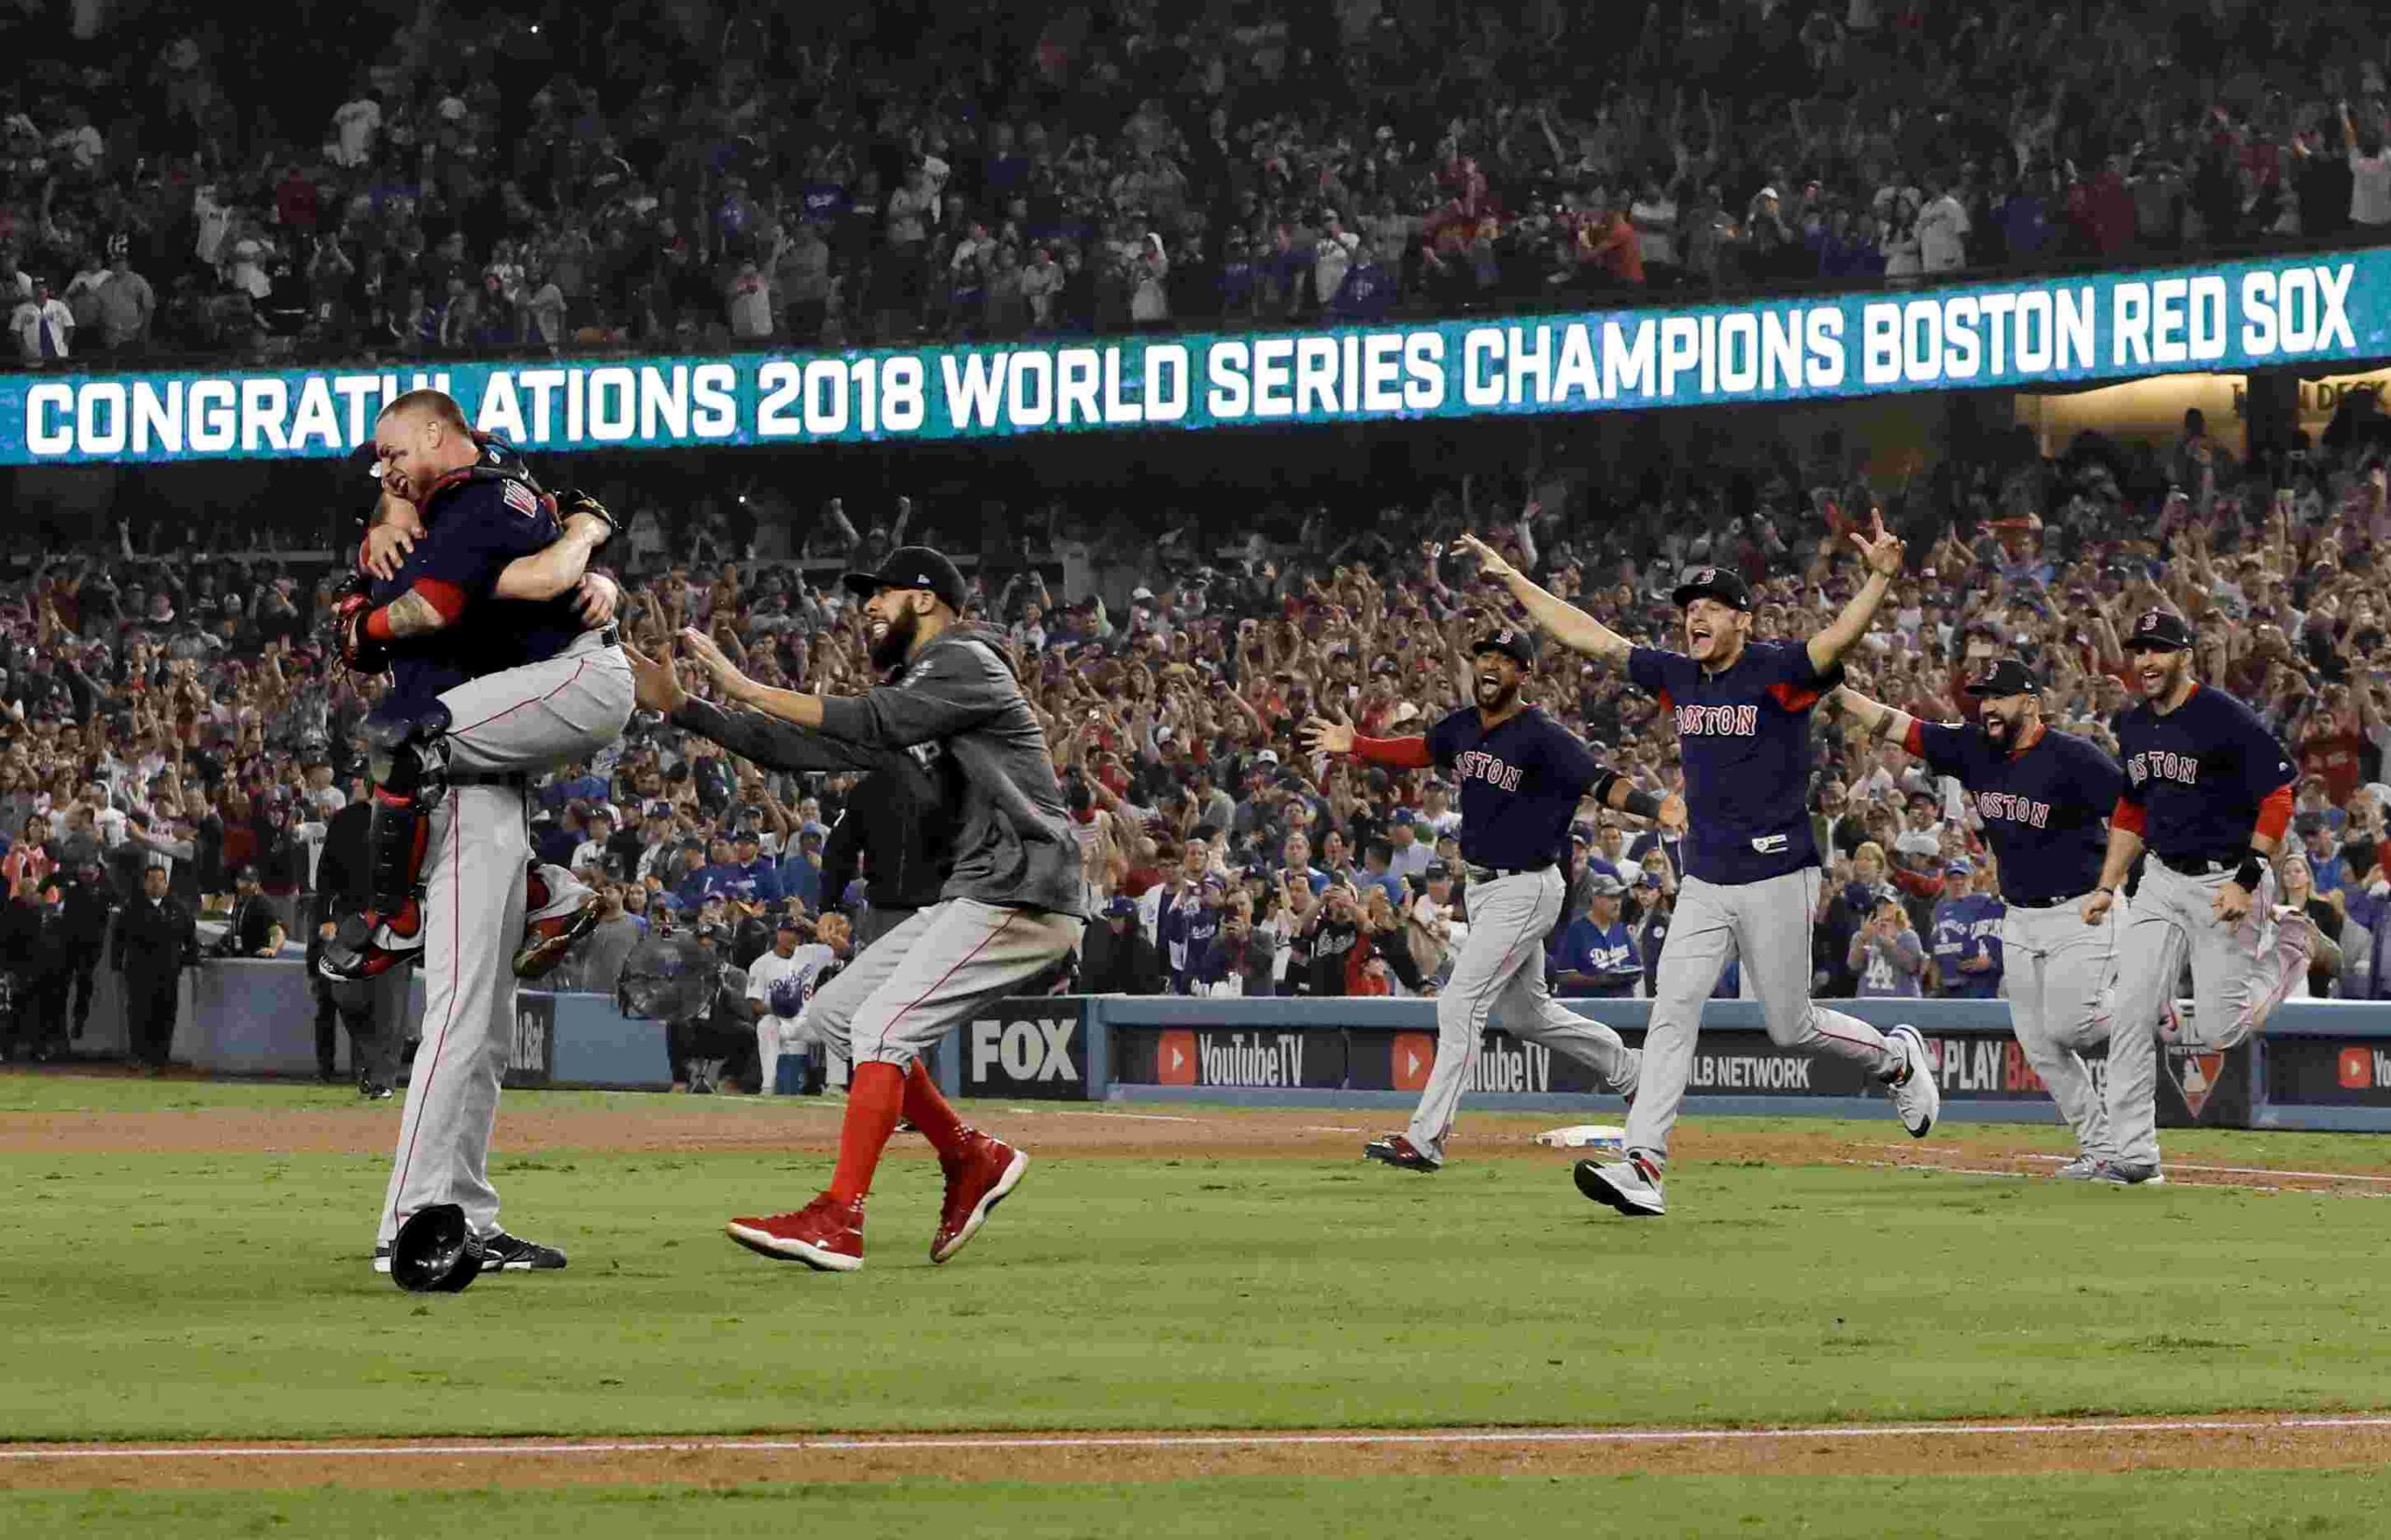  Dynasty! The 2018 Boston Red Sox are the best team ever, that’s simply a fact!